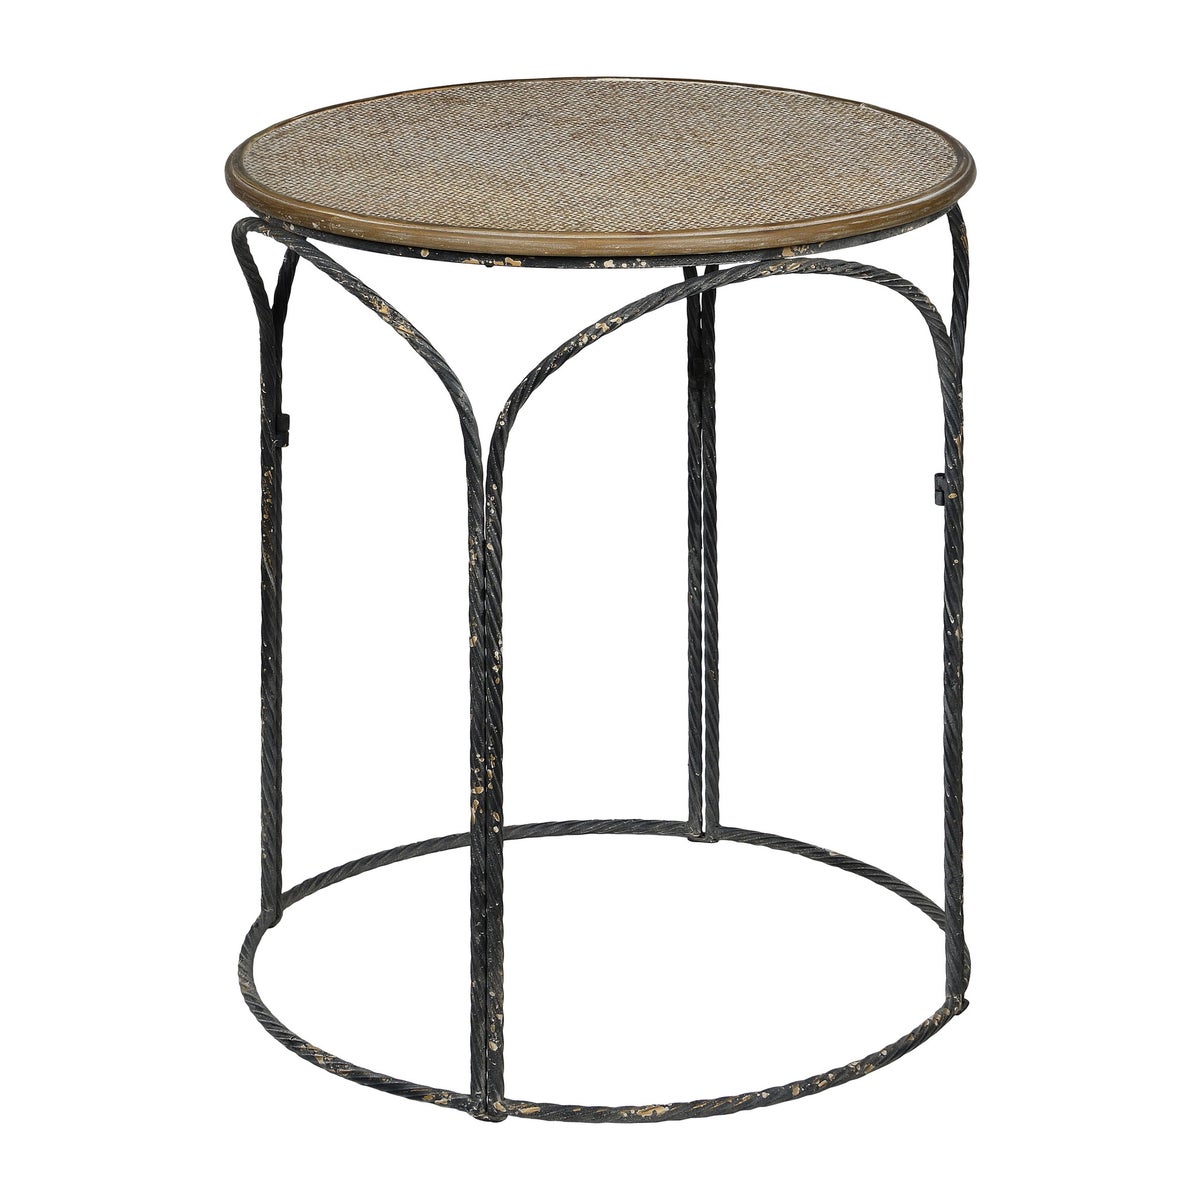 Abner Table